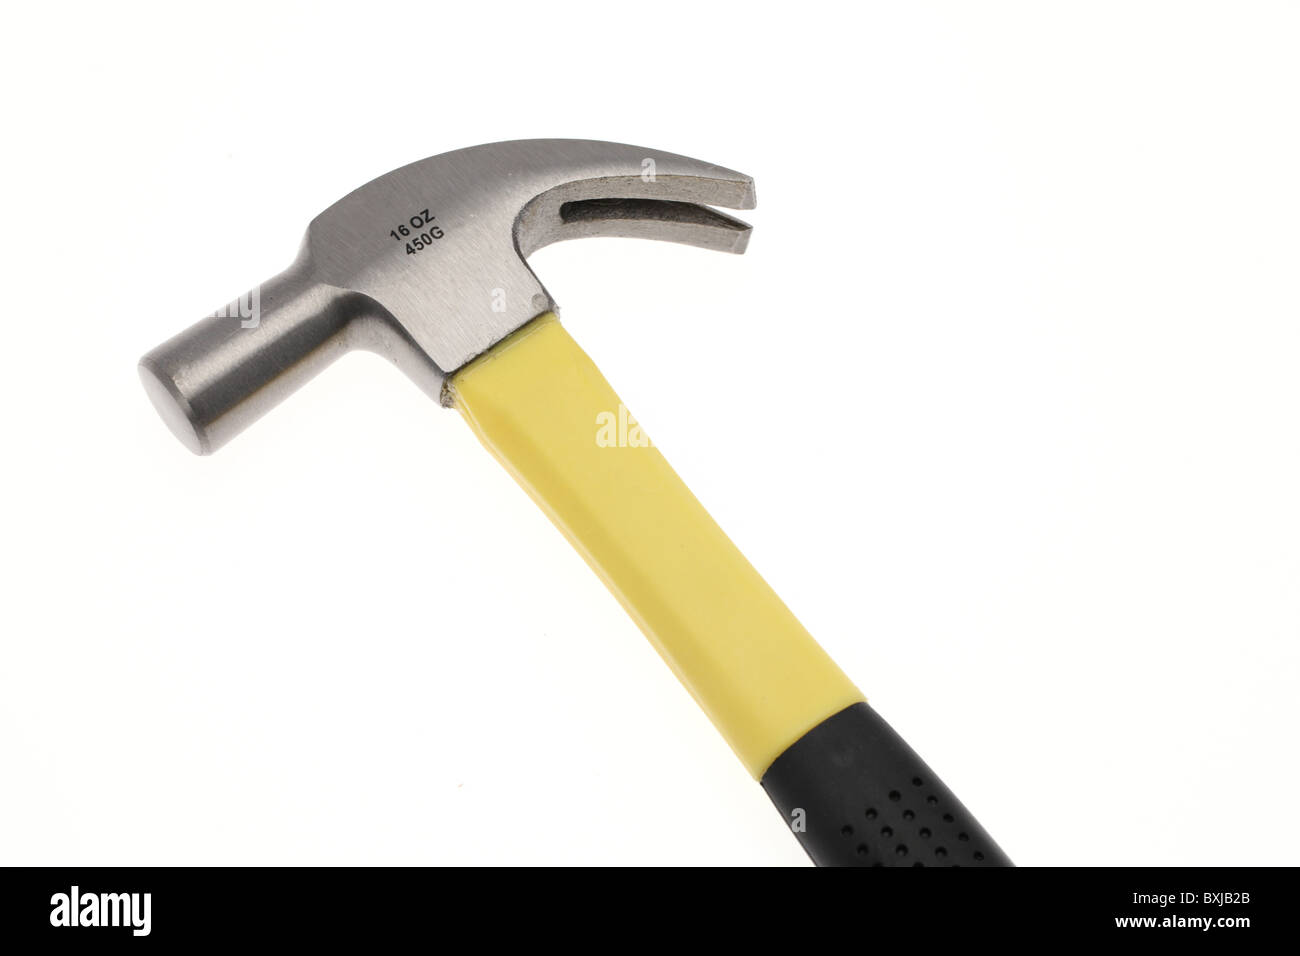 Fibreglass shaft claw hammer, with clipping path Stock Photo